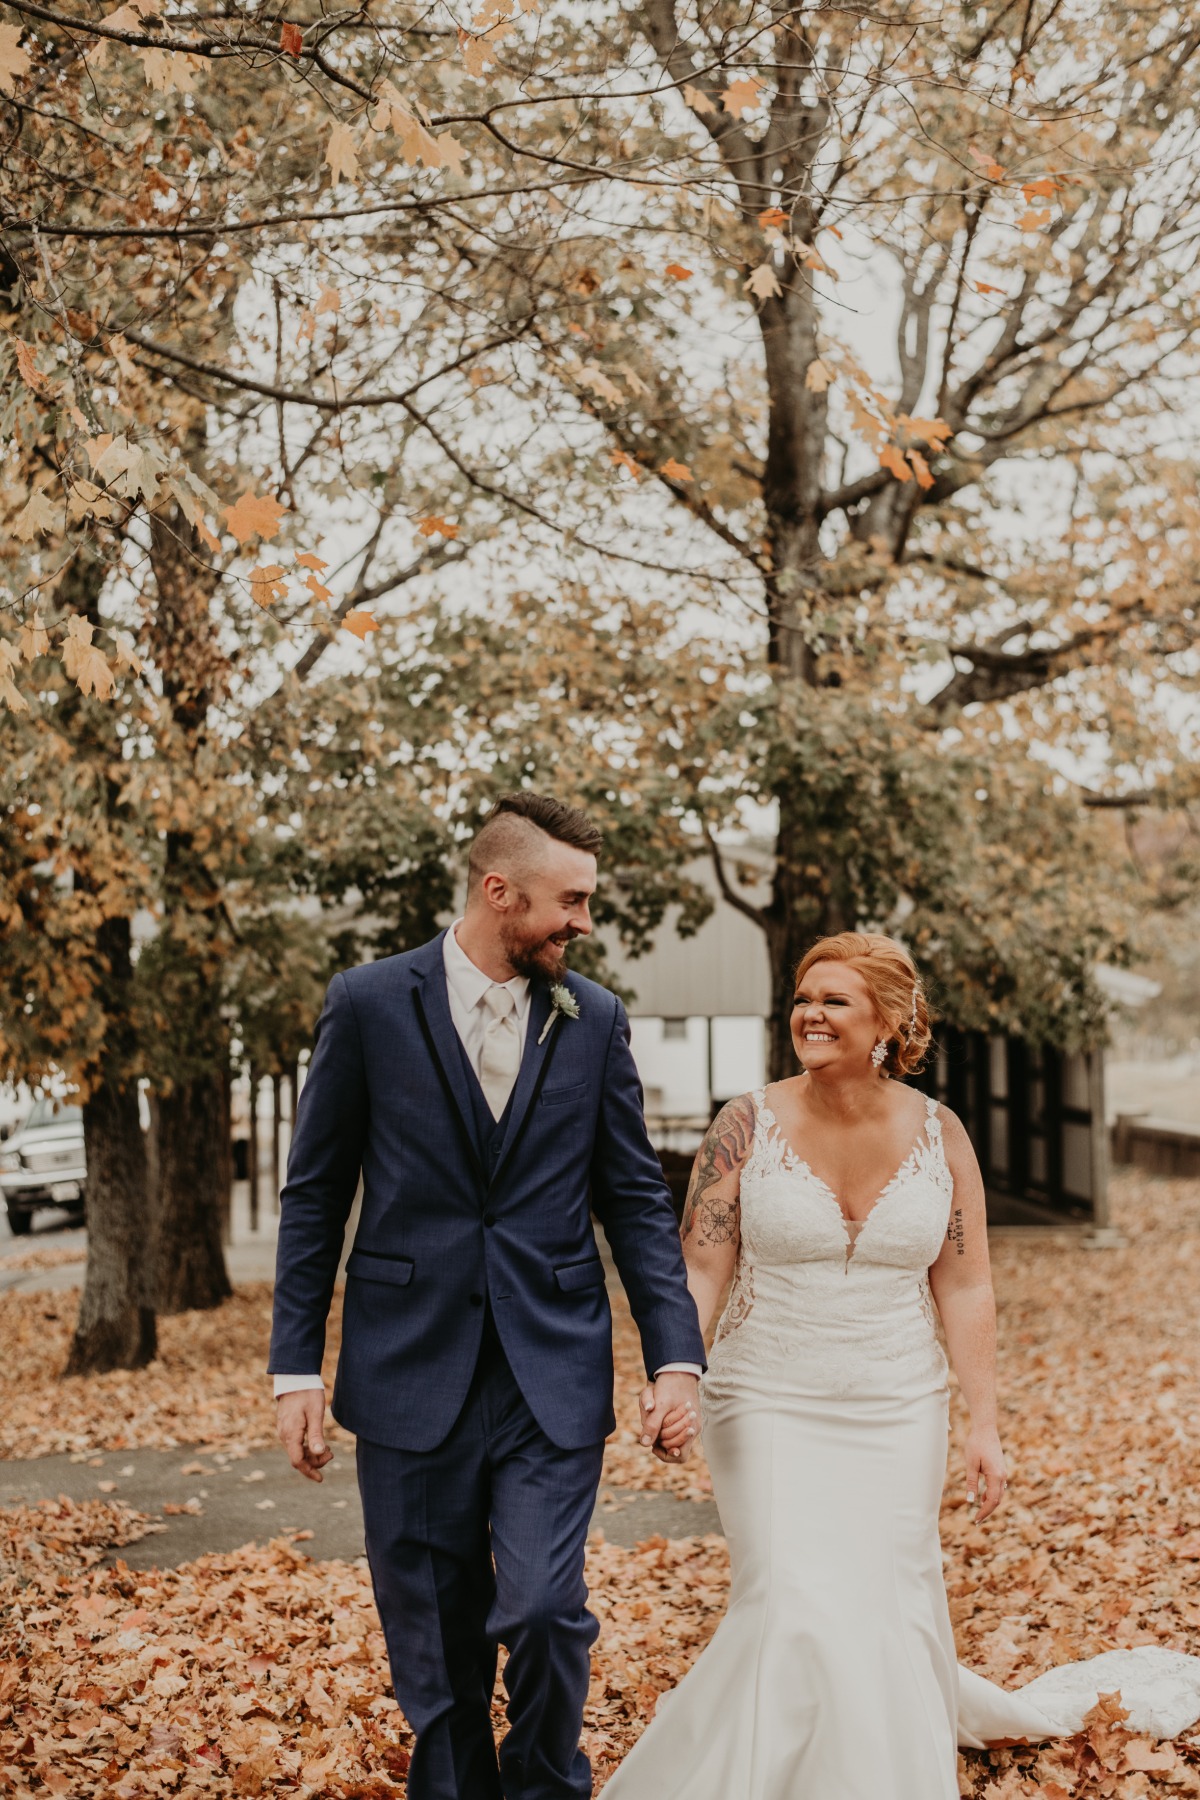 This Rustic Indiana Wedding Looks Like A Real Good Time